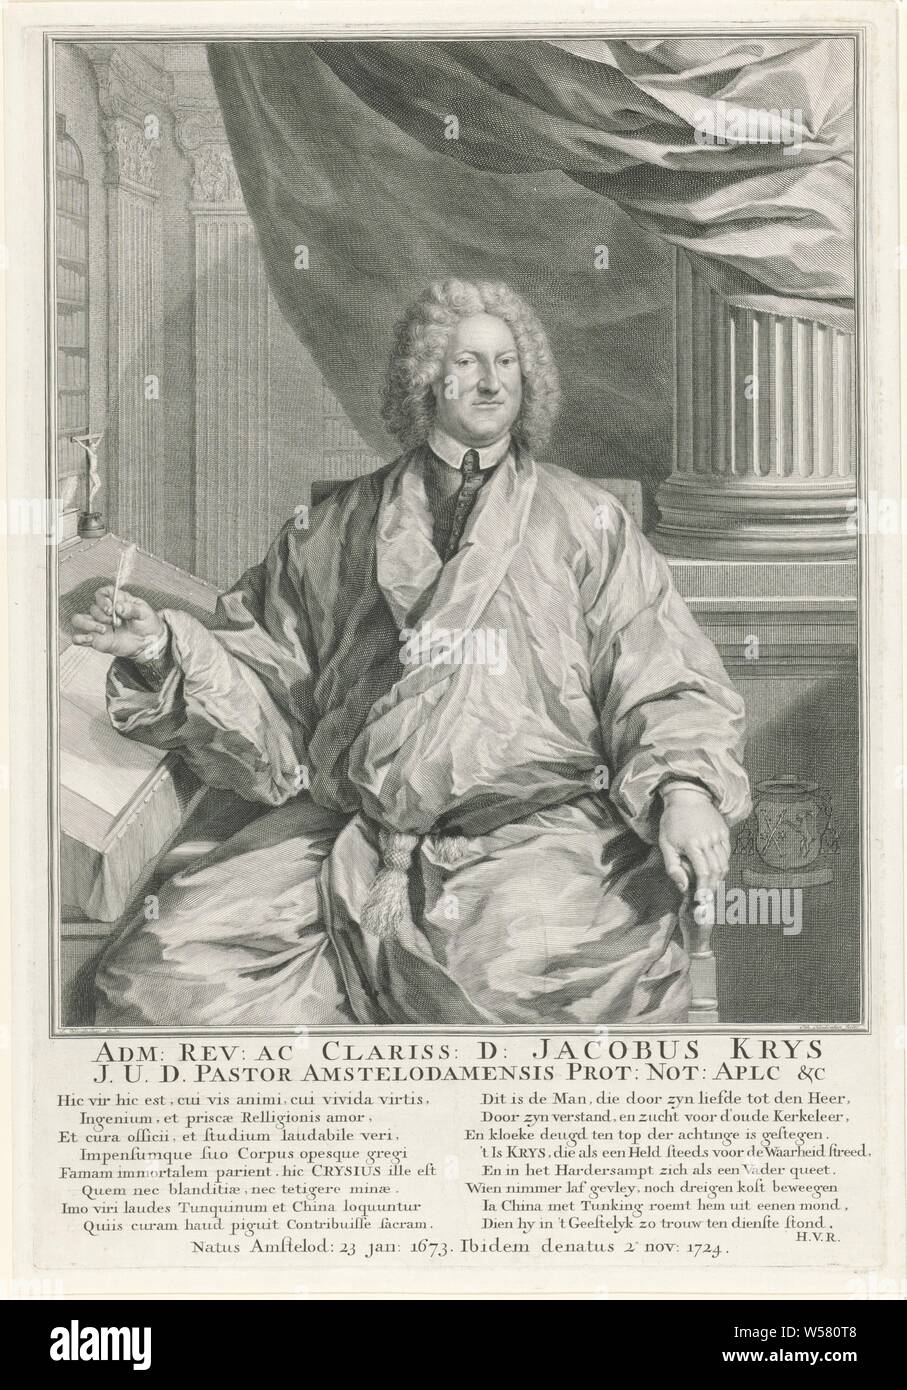 Portrait of Jacobus Ignatius Krijs Jacobus Krys (title on object), Jacobus Ignatius Krijs sitting at desk with a crucifix. A writing spring in his hand. Behind him a column and a curtain, behind it two pilasters and bookcases. To his right a religious weapon. Below the portrait his name and information are in two lines in Latin. Two columns of eight lines each, left in Latin and right in Dutch. Below are birth and death data in a line in Latin., Crucifix, personal devotion, quill, Jacobus Ignatius Krijs, Jacob Houbraken (mentioned on object), Amsterdam, 1724 - 1780, paper, engraving, h 459 mm Stock Photo